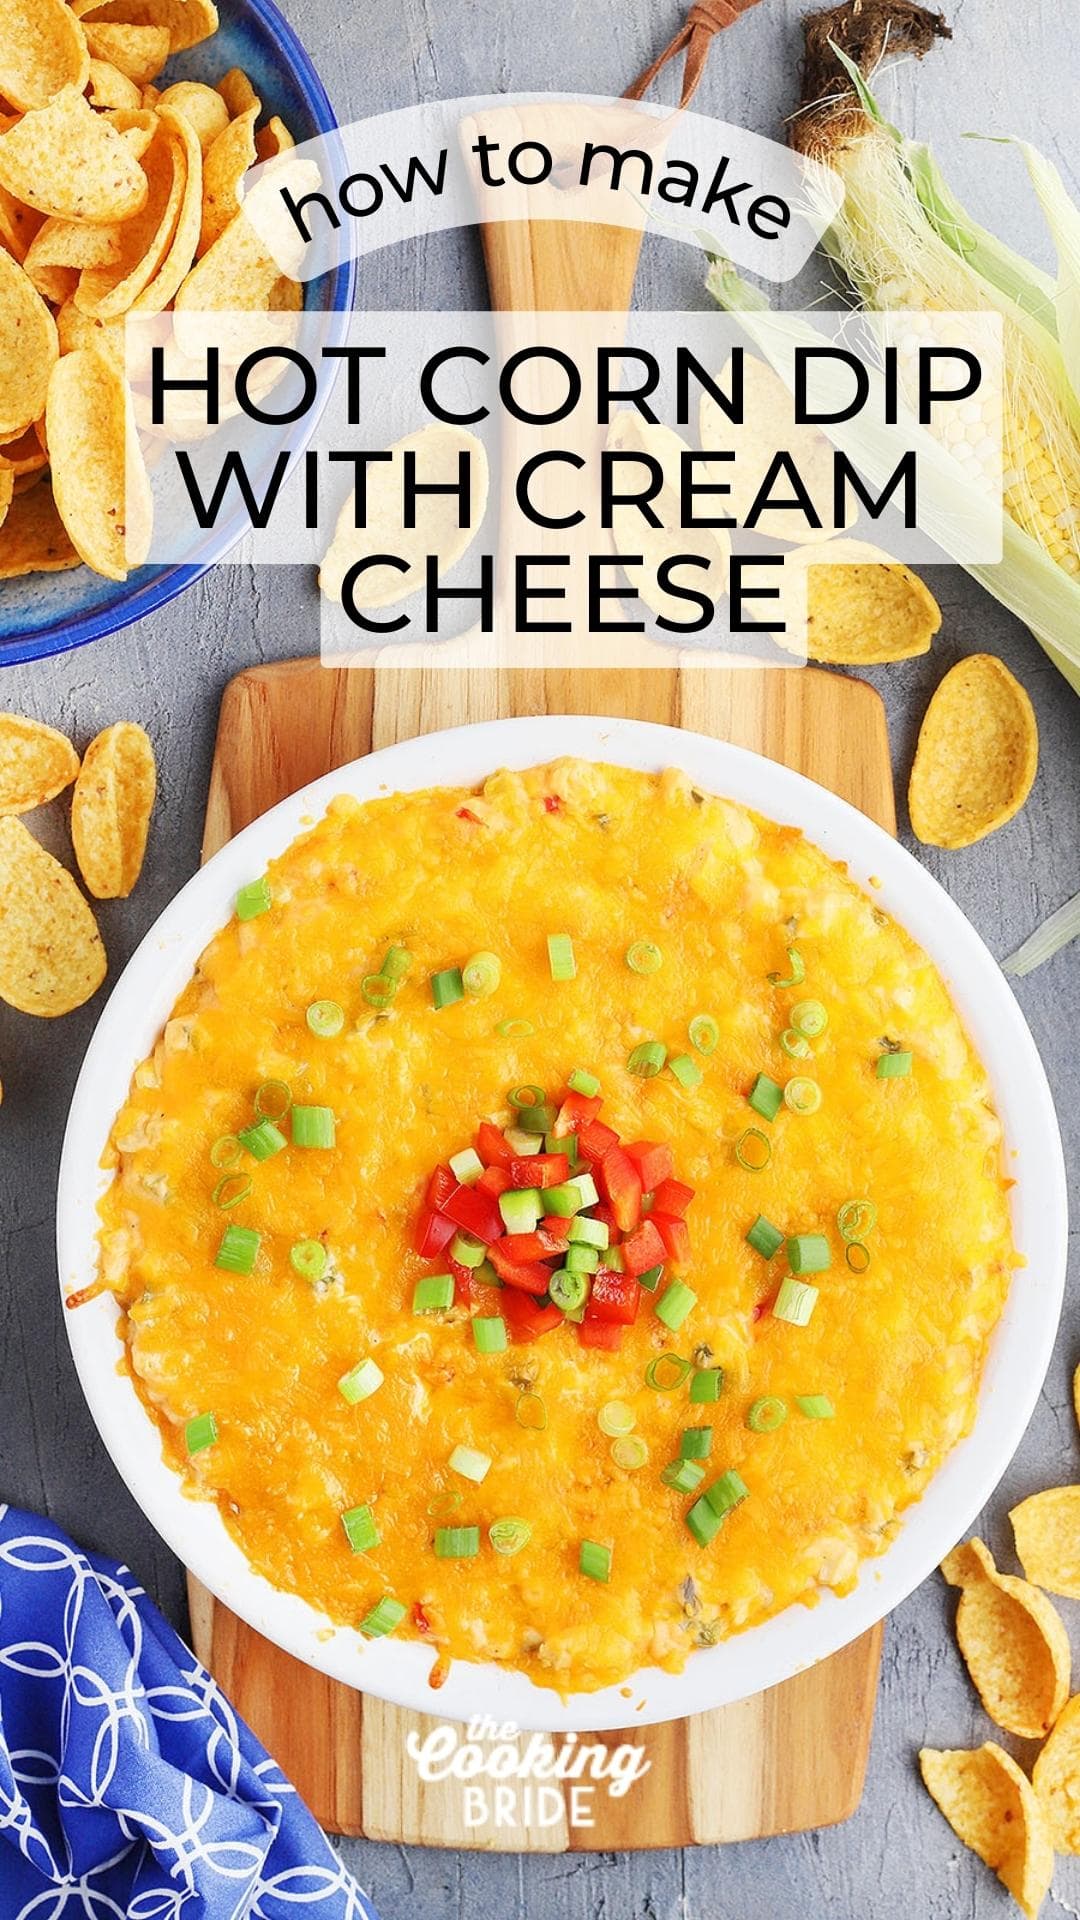 Hot Corn Dip with Cream Cheese - The Cooking Bride